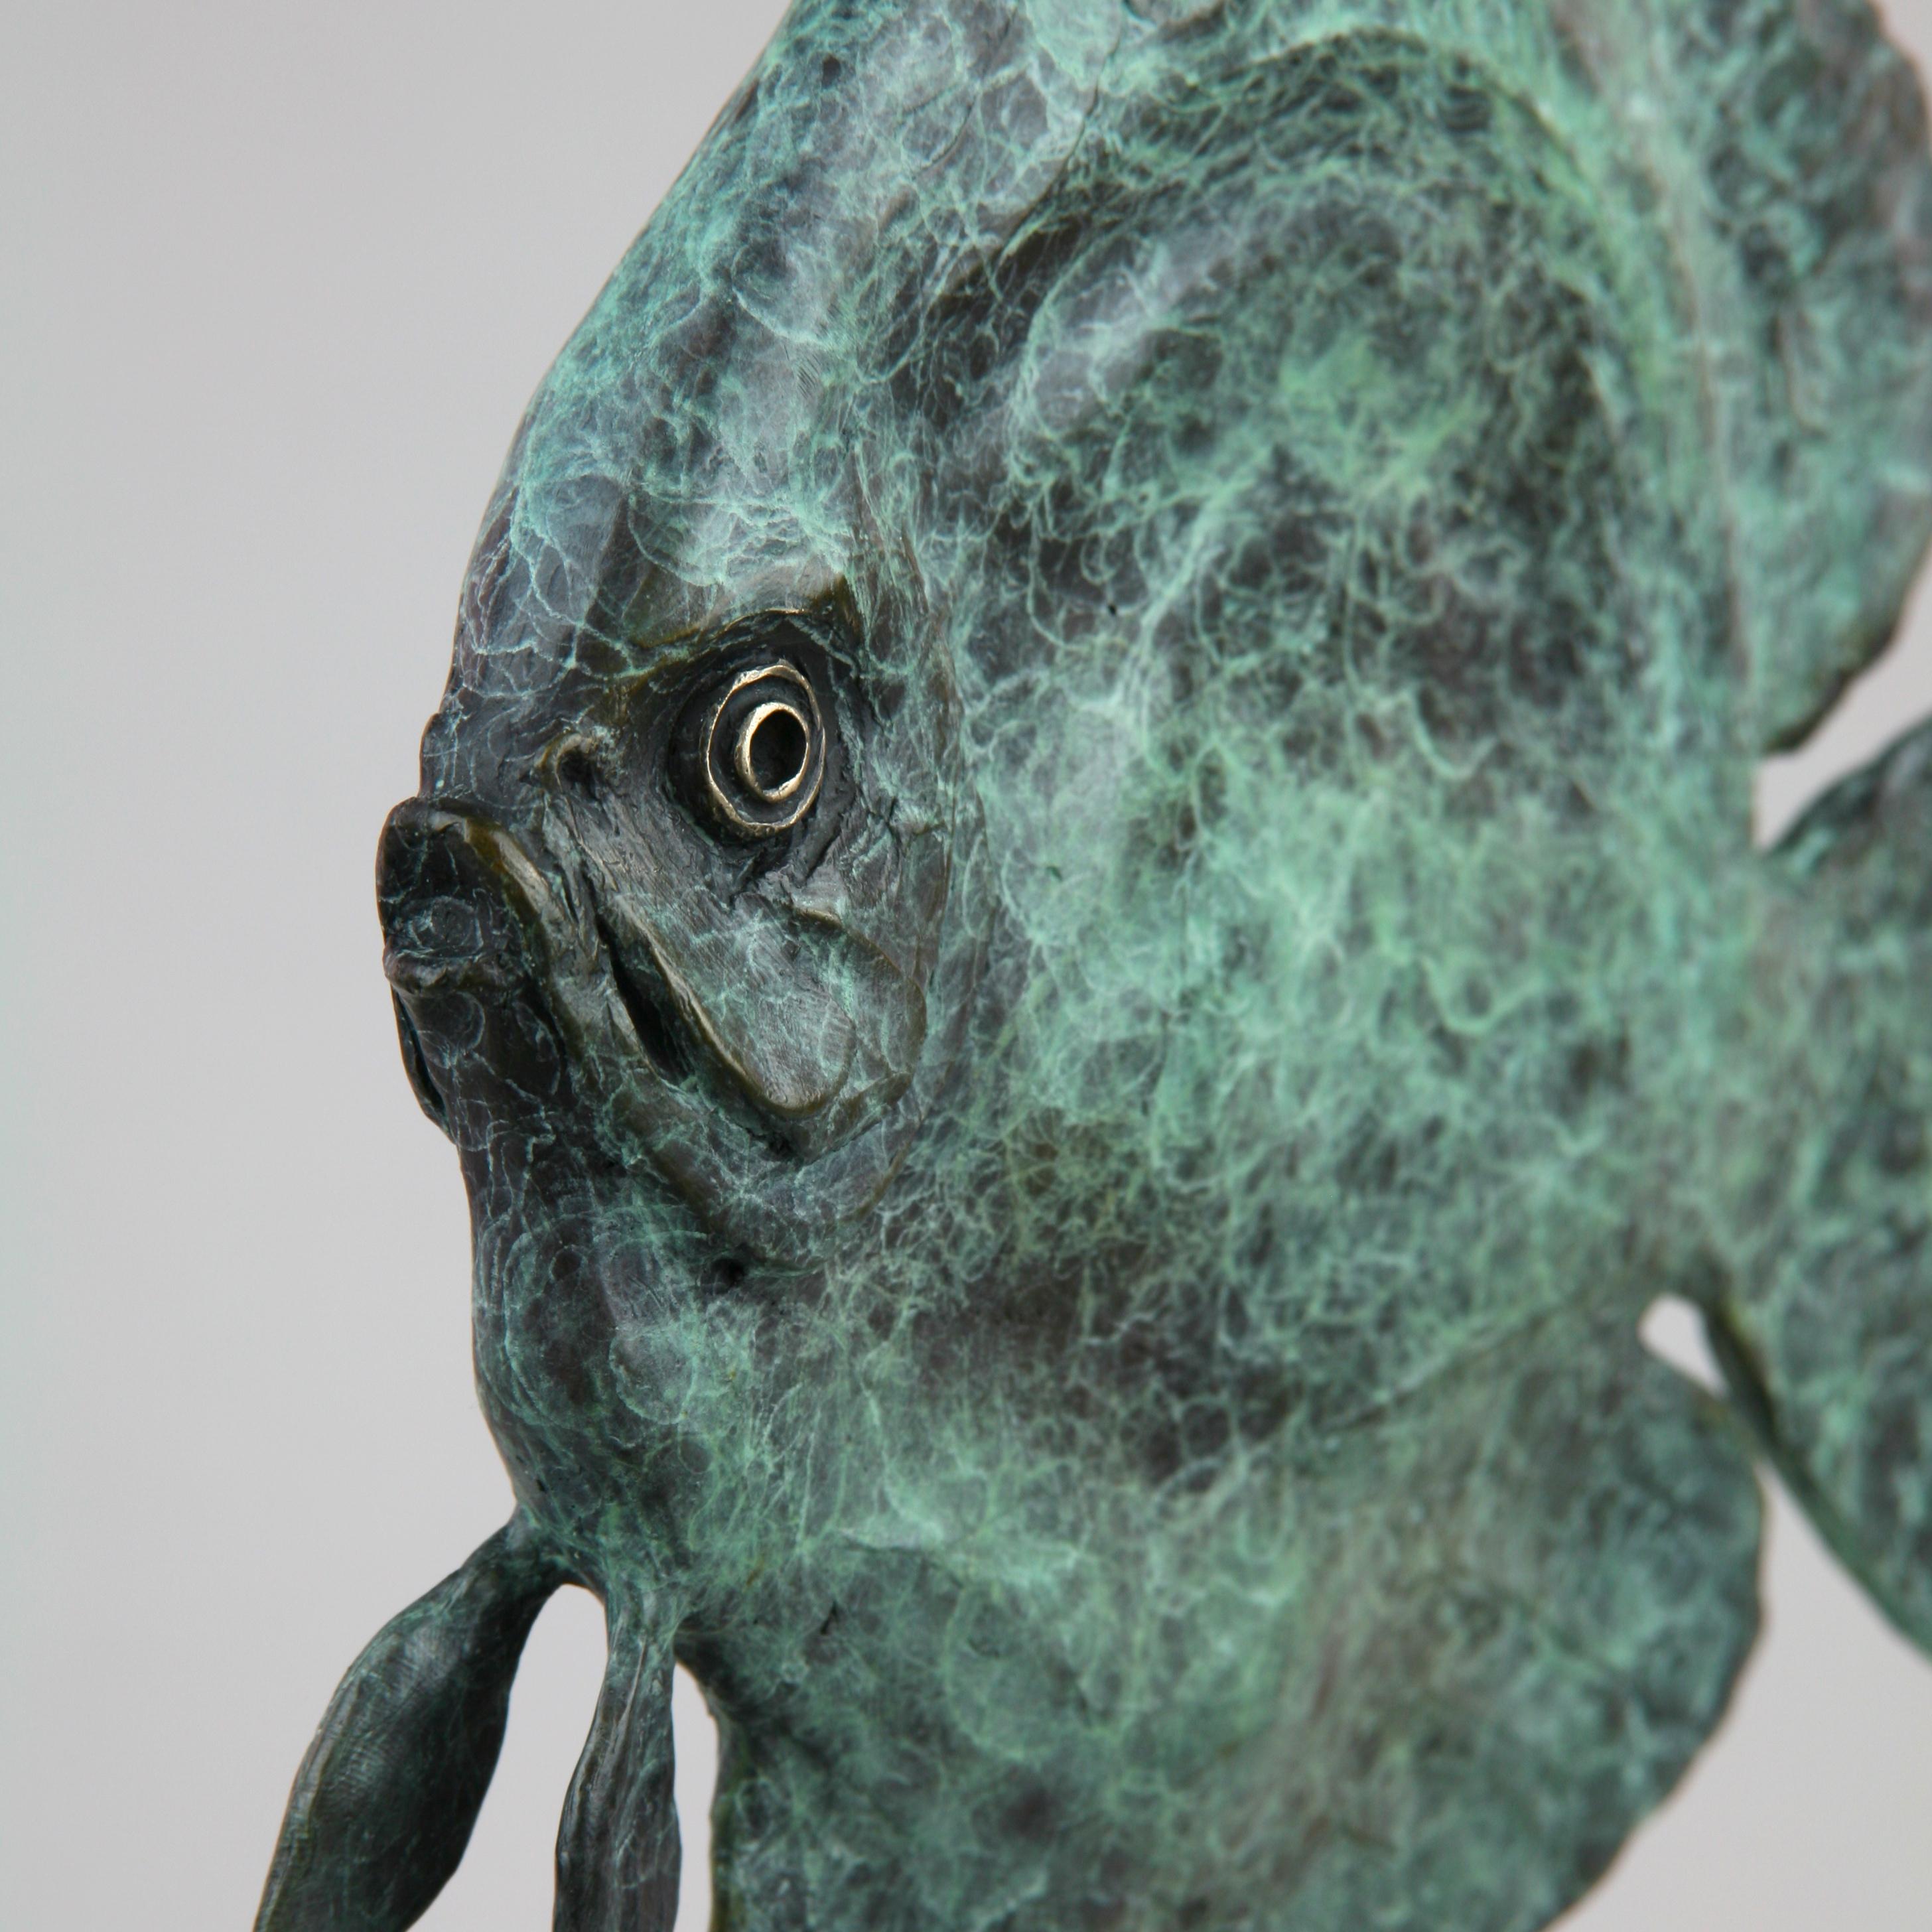 This contemporary marine sculpture by Andrzej Szymczyk depicts a Discus Fish and is expertly cast in bronze. The free standing piece is finished with a serene green coating, a hue reminiscent of its natural ocean environment, and features